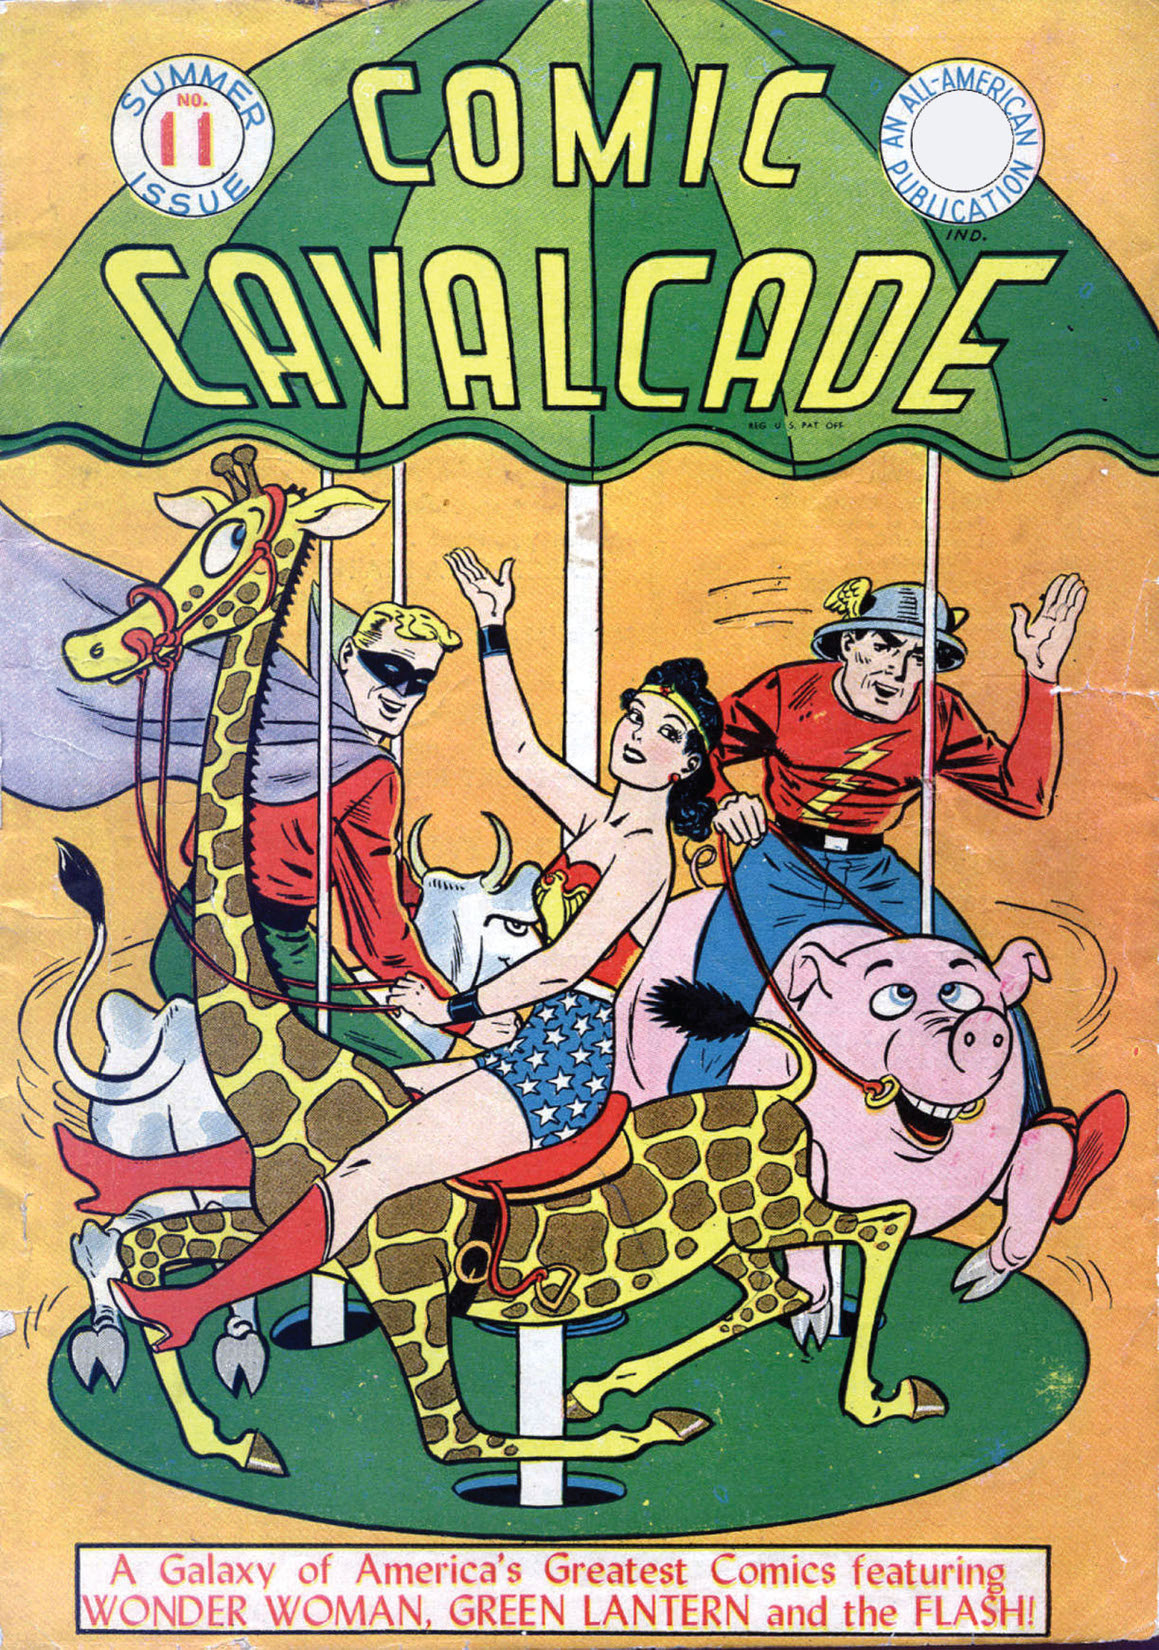 Comic Cavalcade #11 preview images